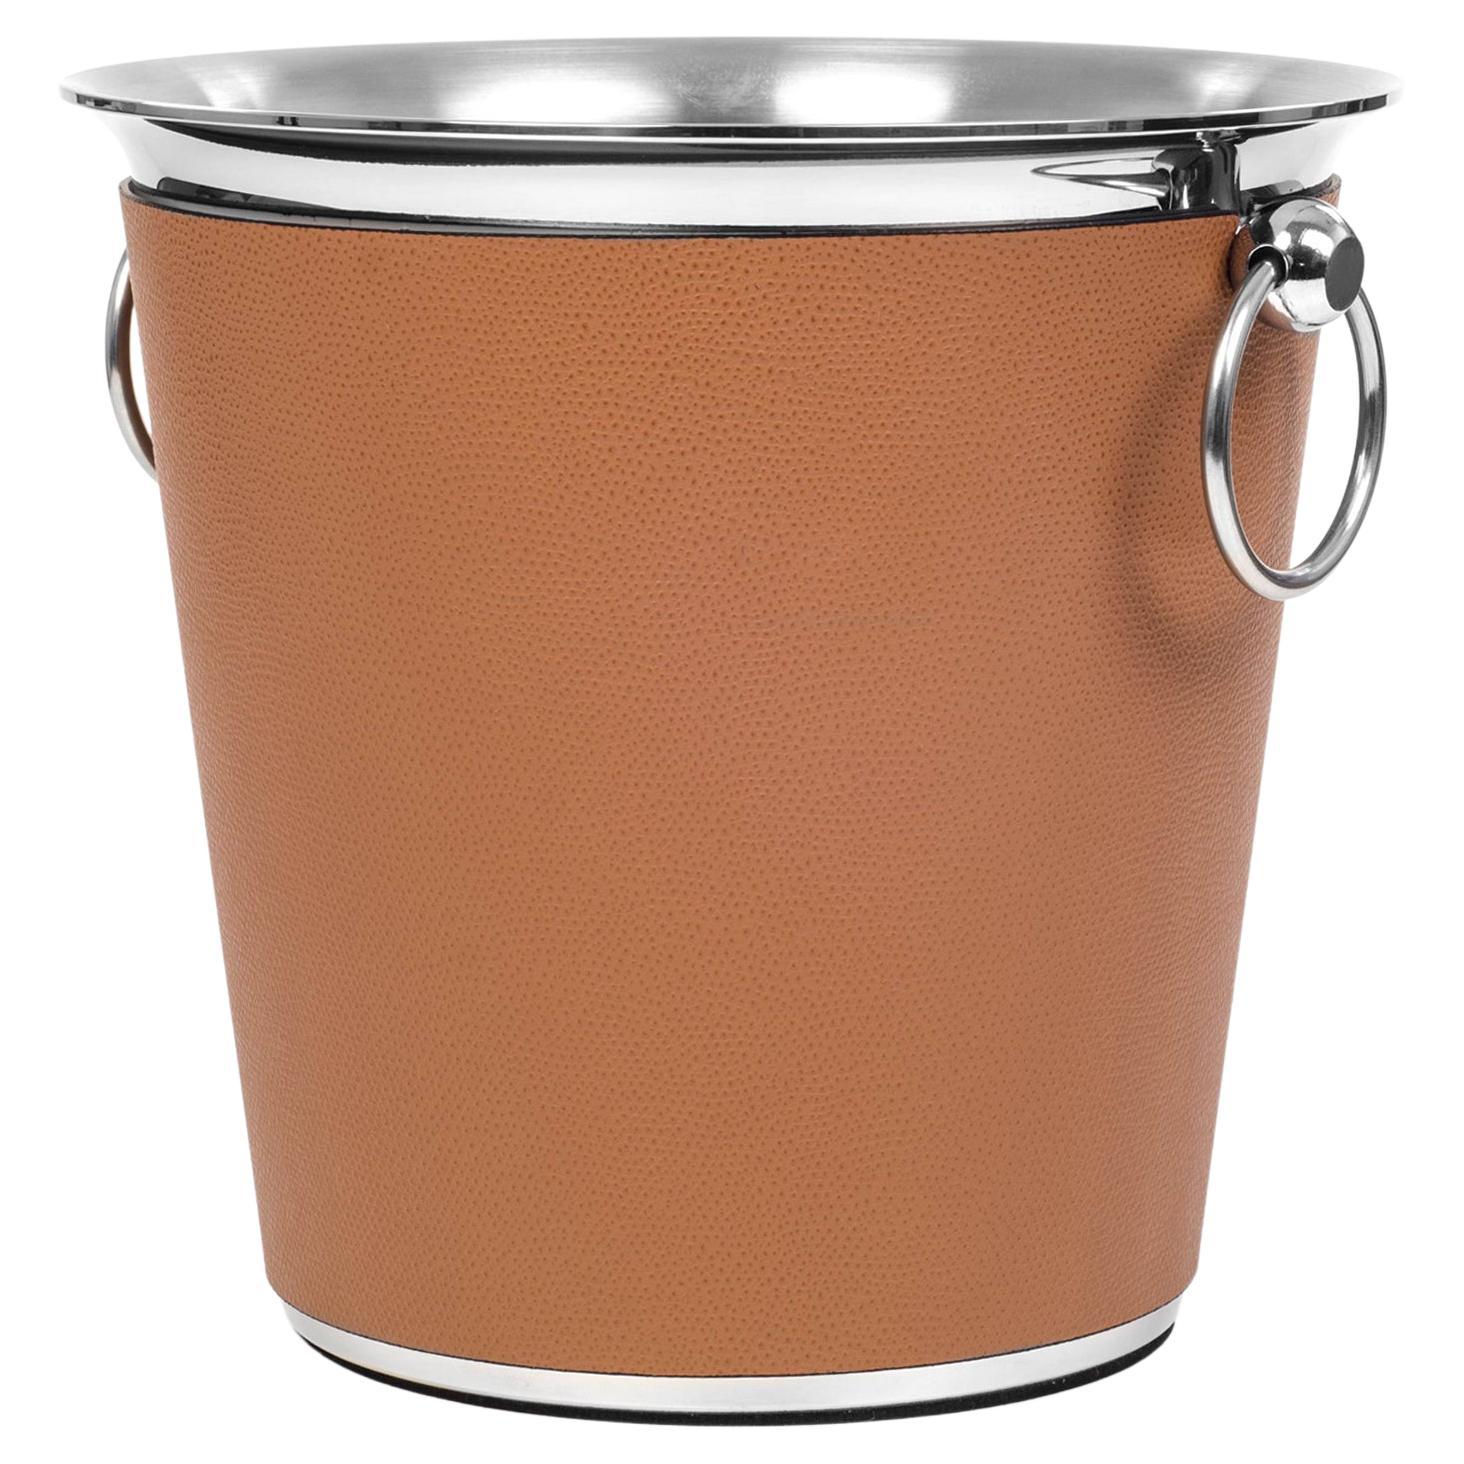 21st Century Steel Thermal Champagne Bucket with Leather Cover Handmade in Italy